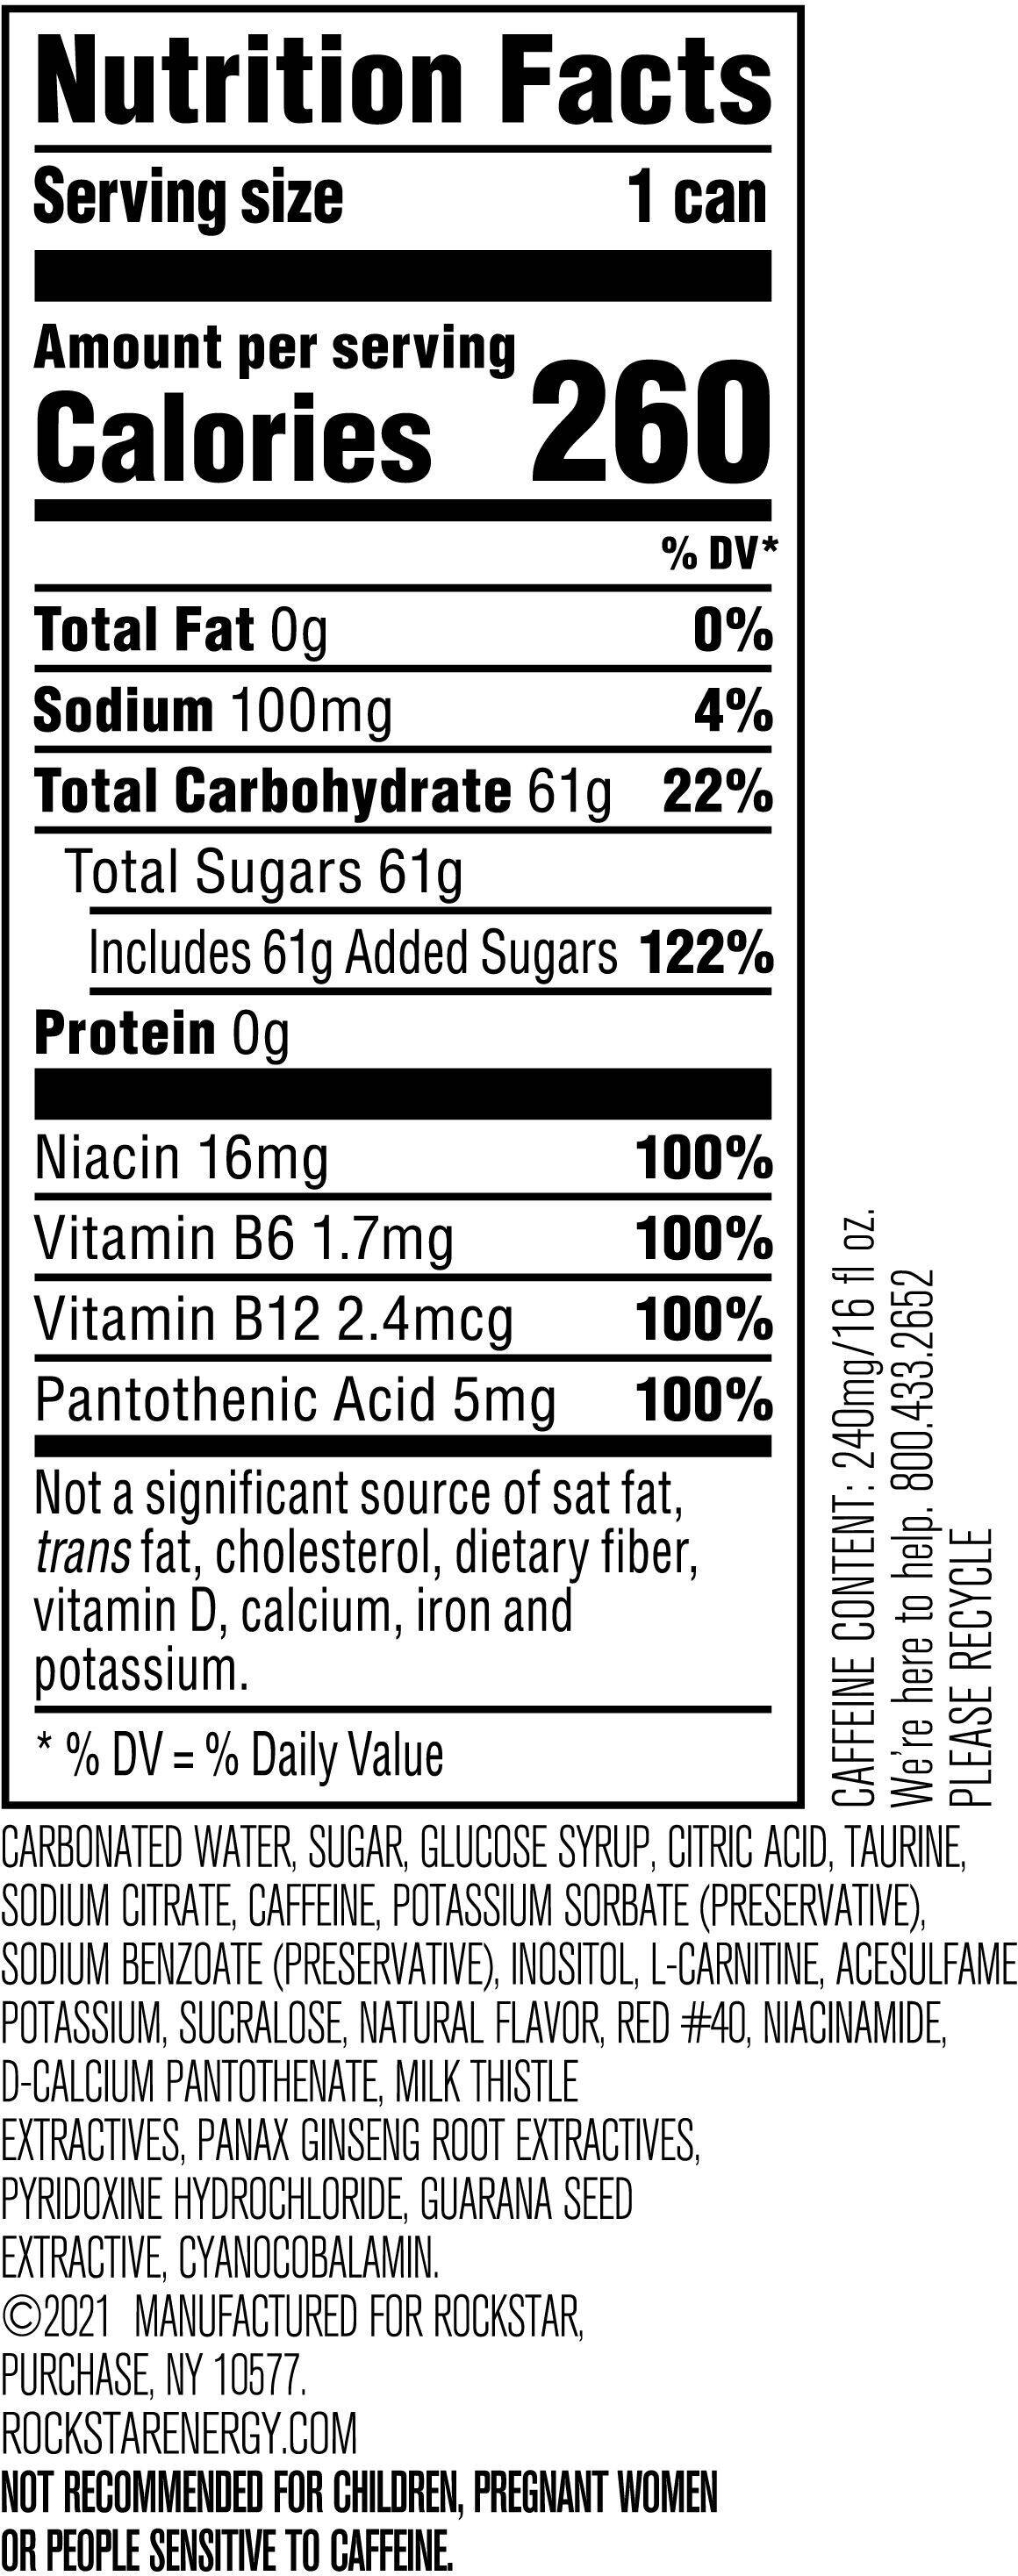 Image describing nutrition information for product Rockstar Punched Fruit Punch